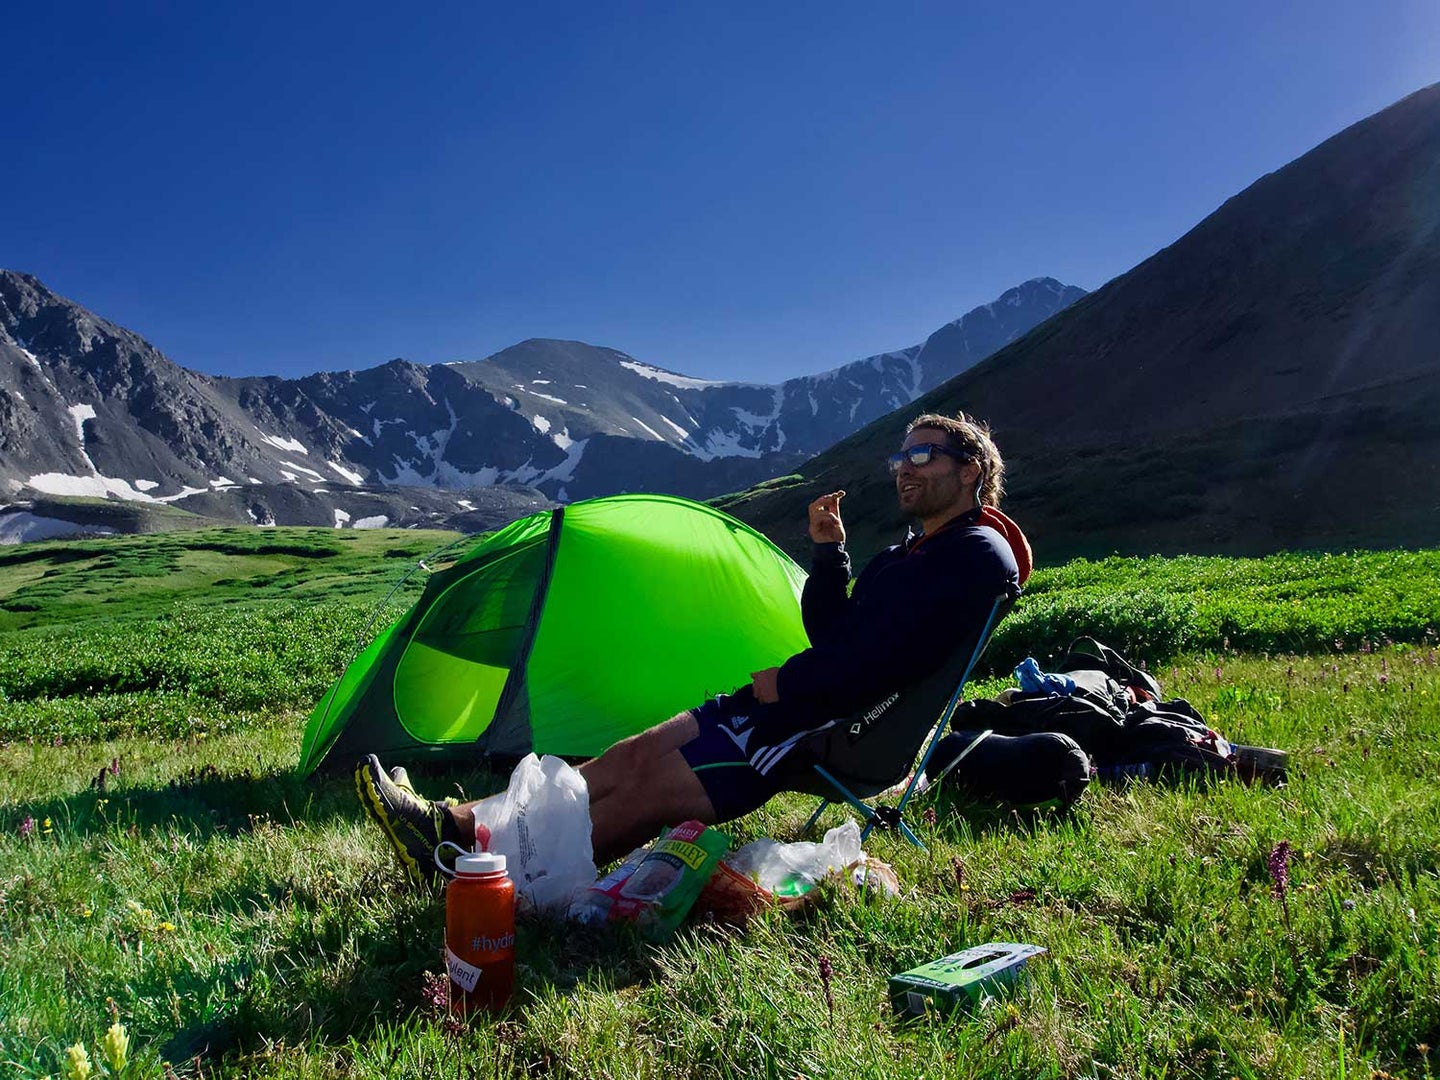 Man eating meal while camping in mountains